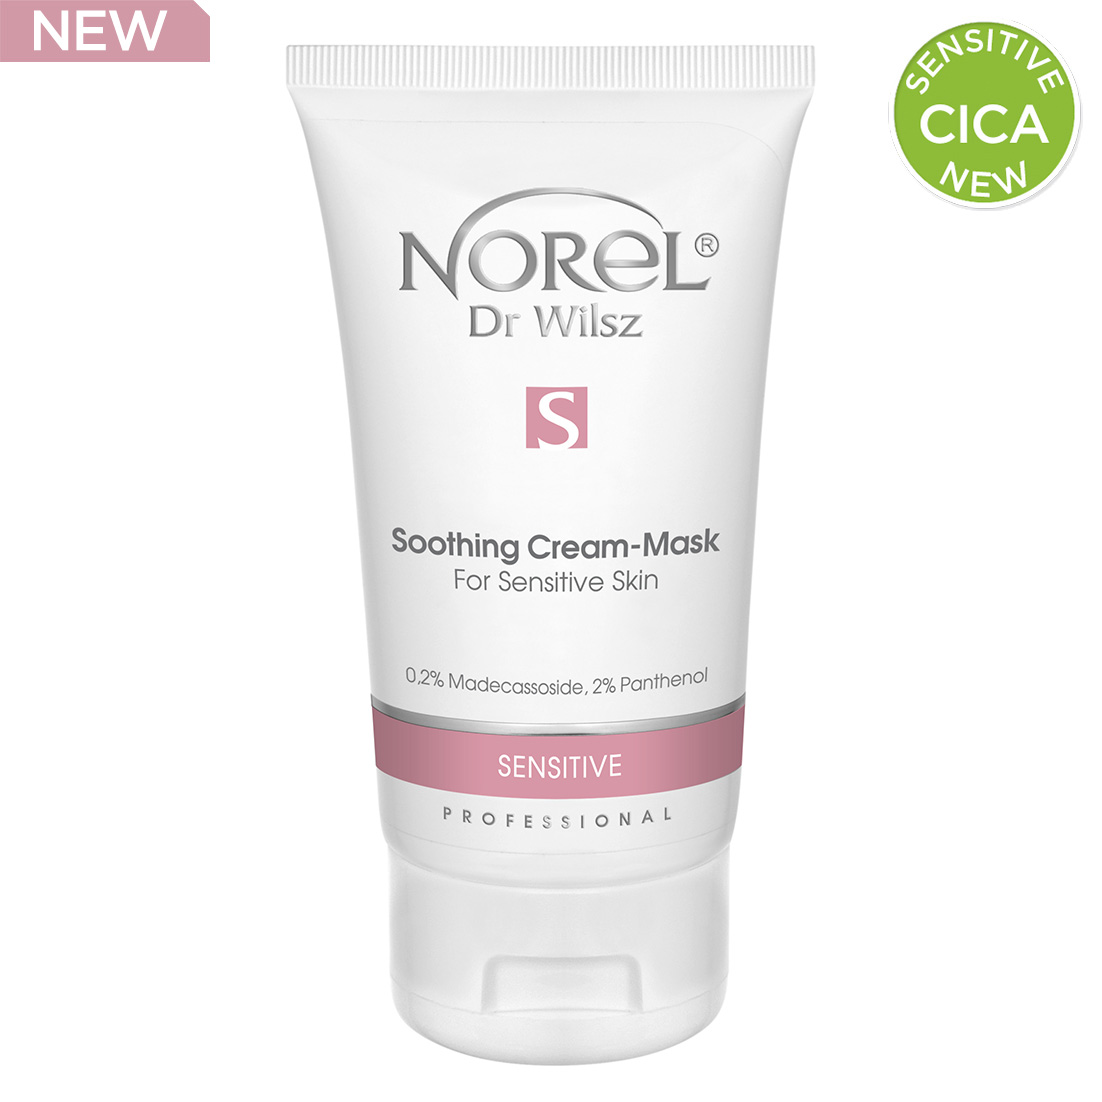 Soothing Cream-Mask For Sensitive Skin